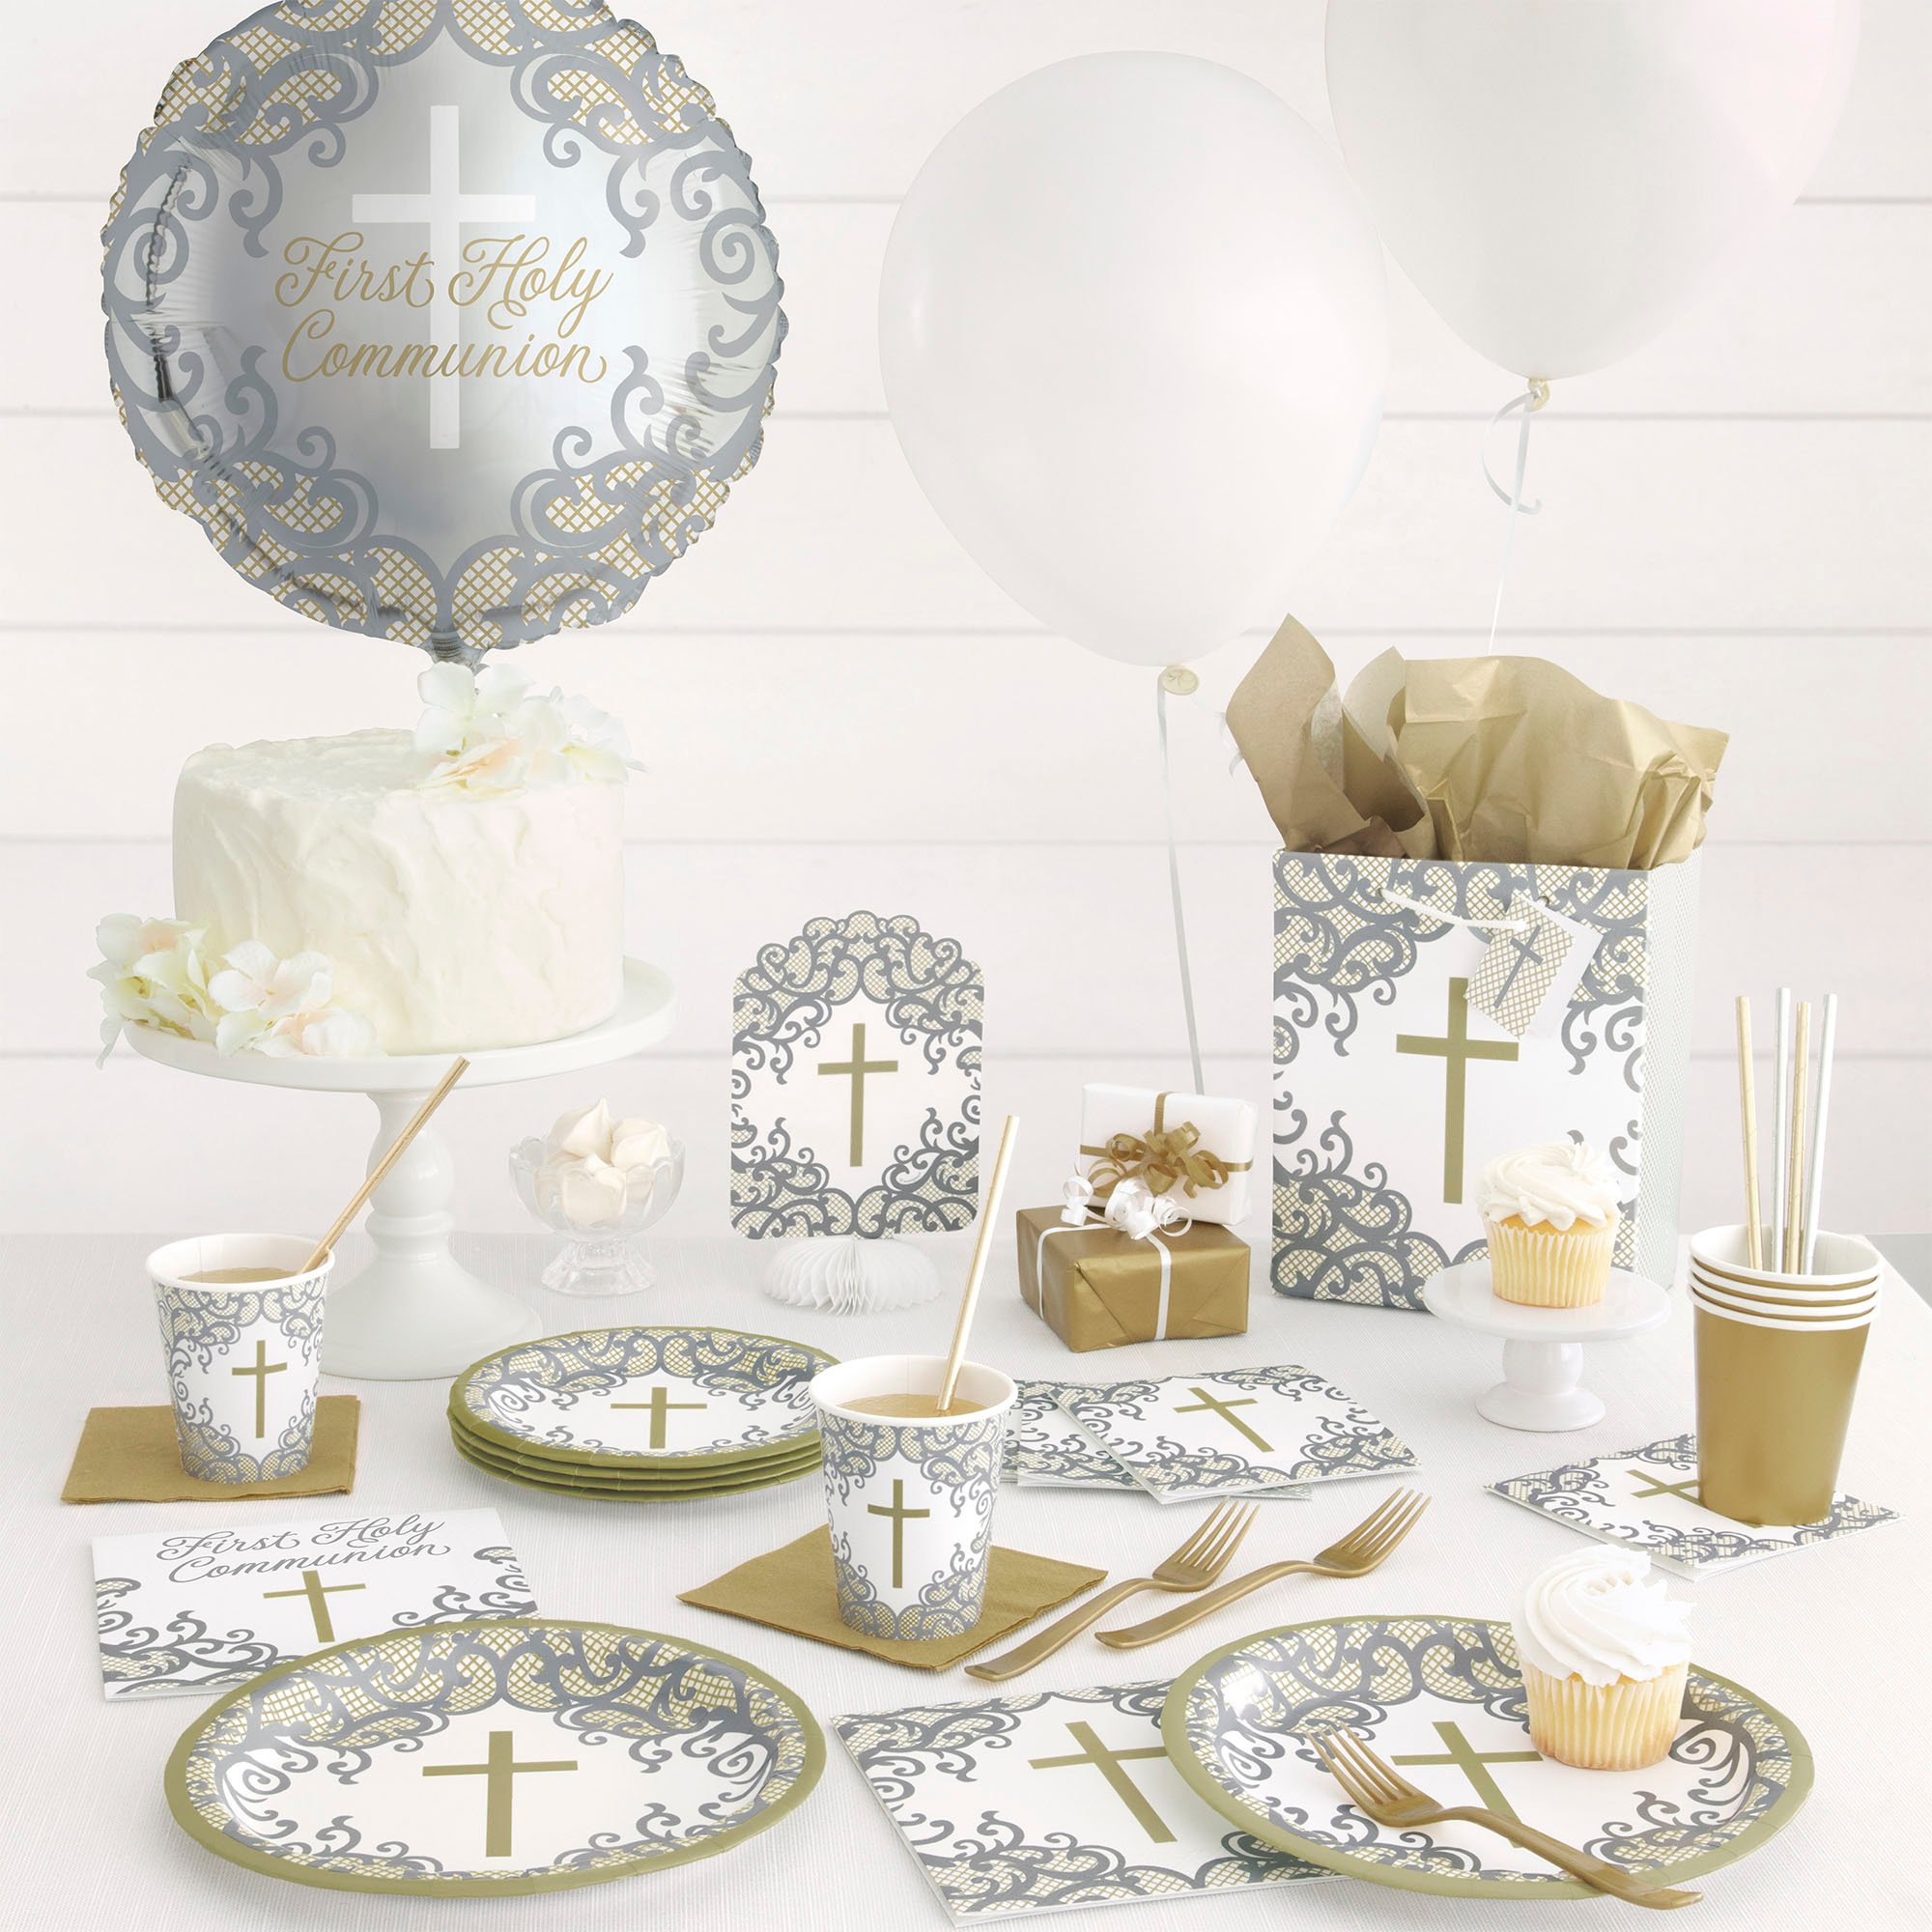 Gold & Silver Confirmation Tableware & Decorations - 16 Guests